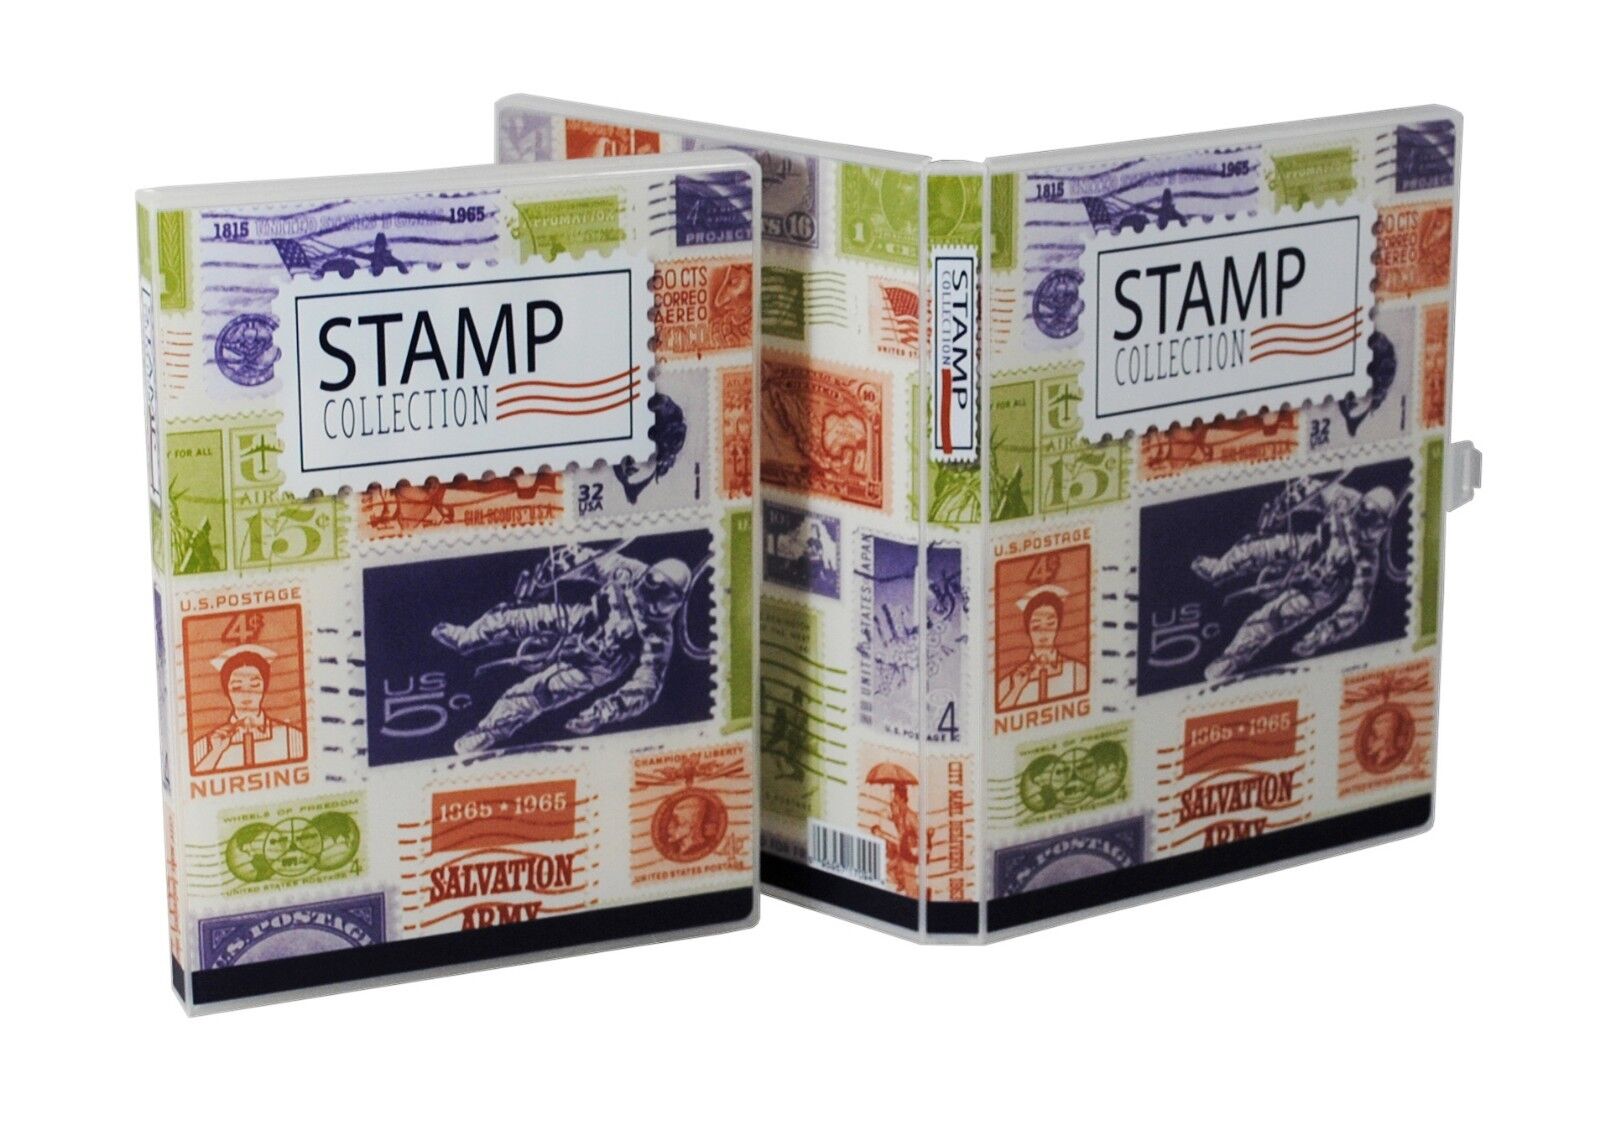 Stamp Collection Kit/Album, w/ 10 Pages, Holds 150-300 Stamps (No Stamps) UniKeep 17094 - фотография #9